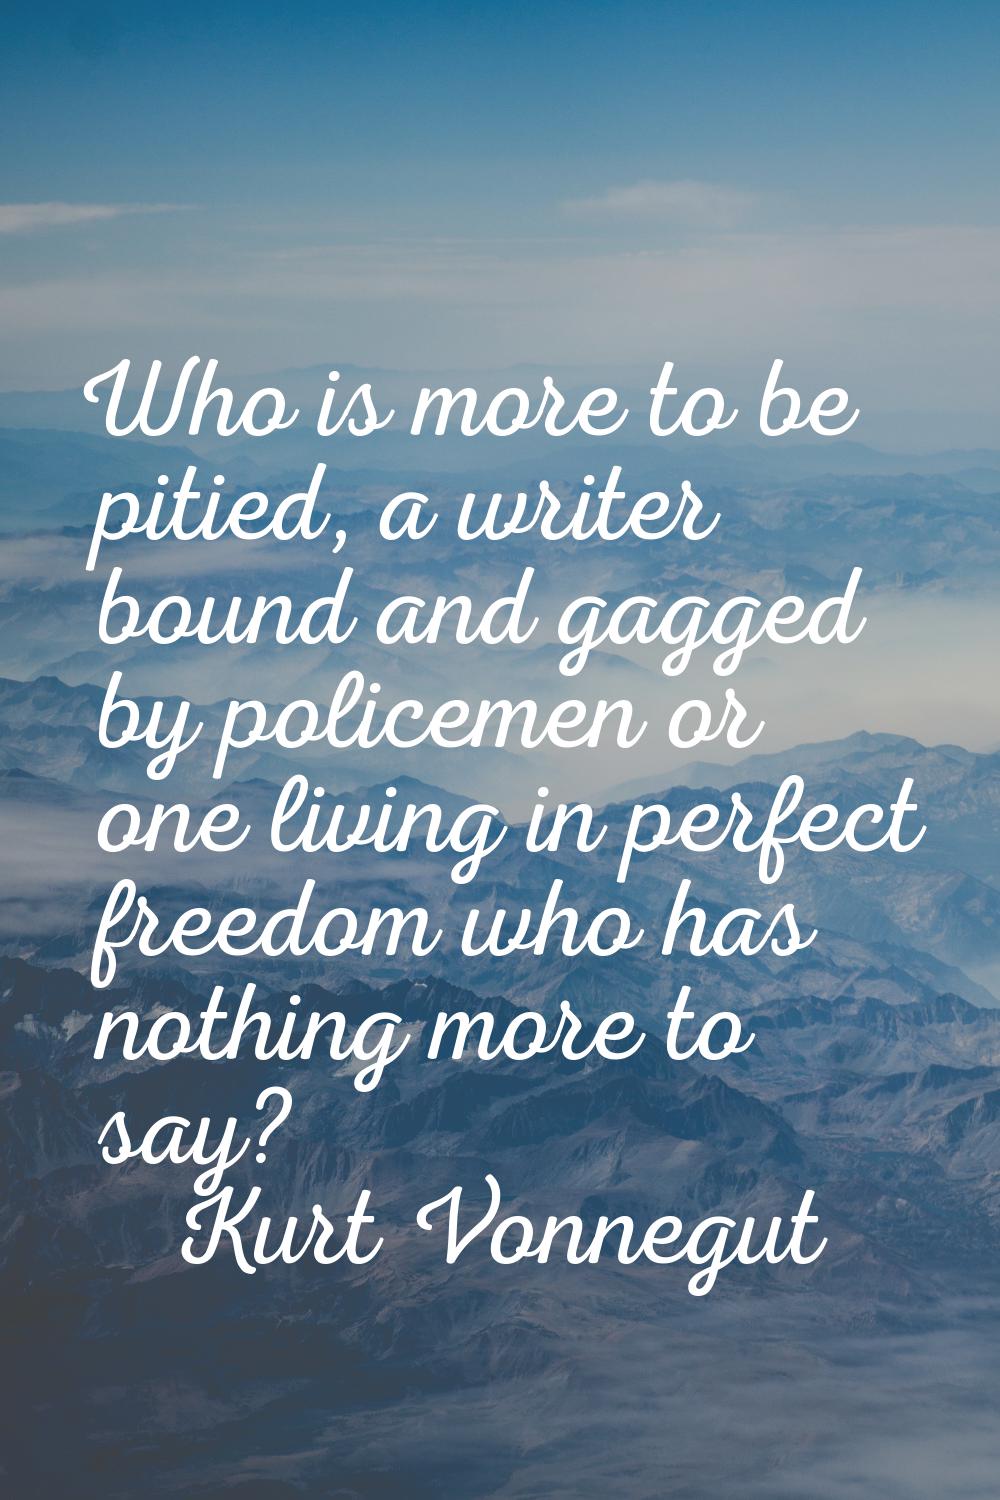 Who is more to be pitied, a writer bound and gagged by policemen or one living in perfect freedom w